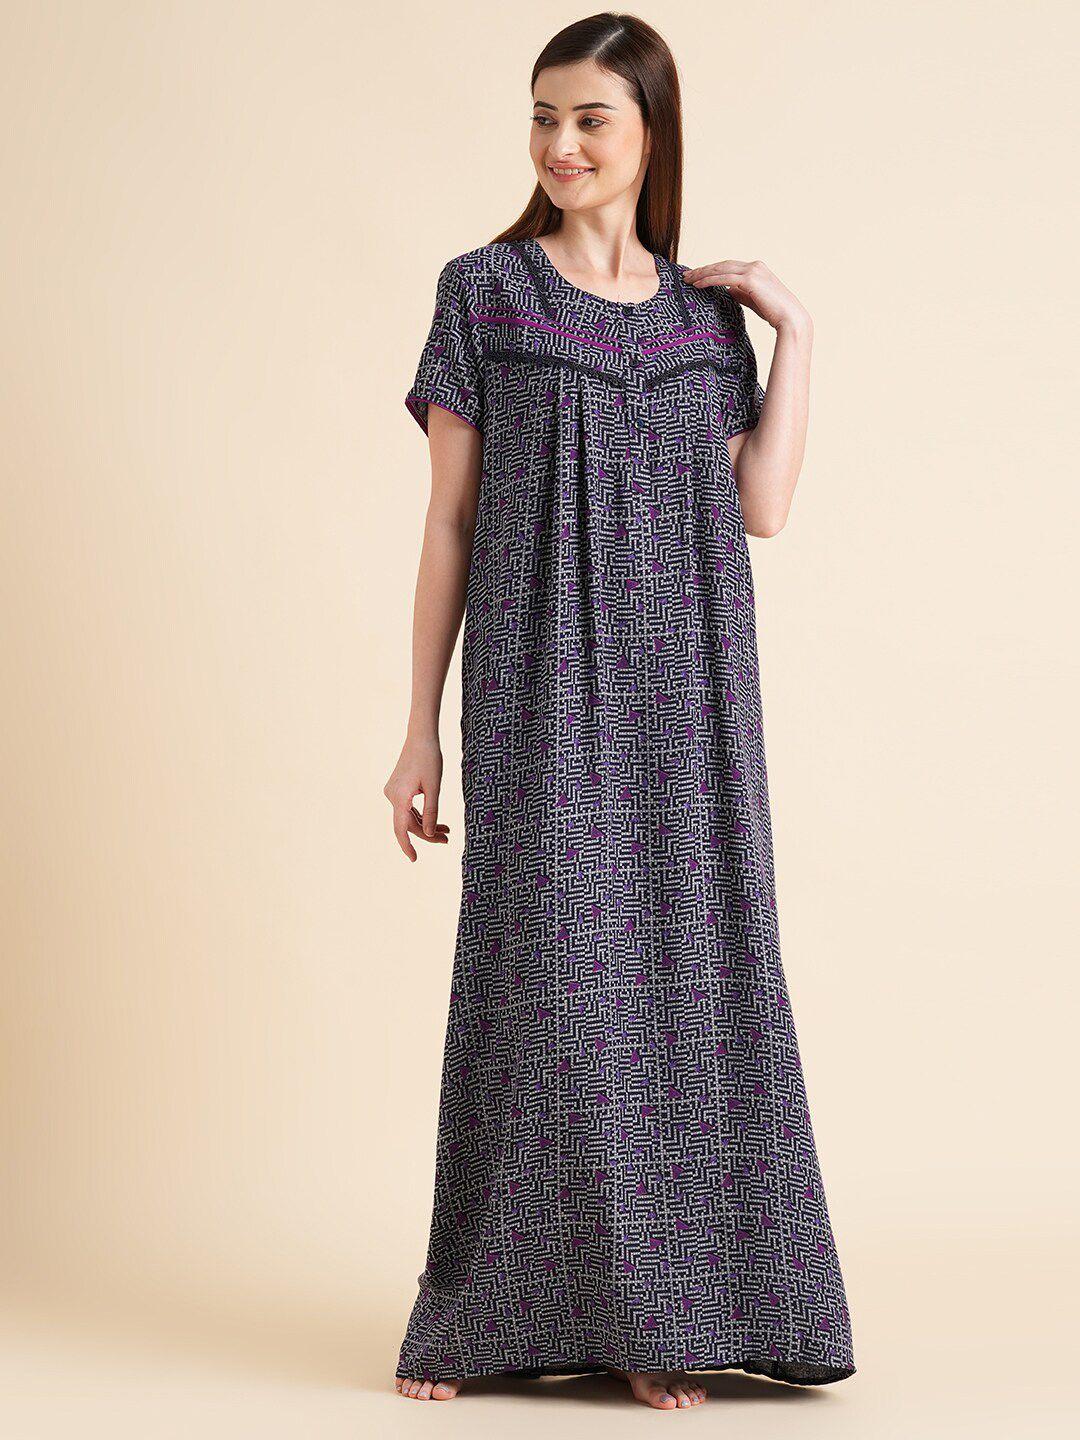 sweet-dreams-navy-blue-geomertic-printed-pure-cotton-maxi-nightdress